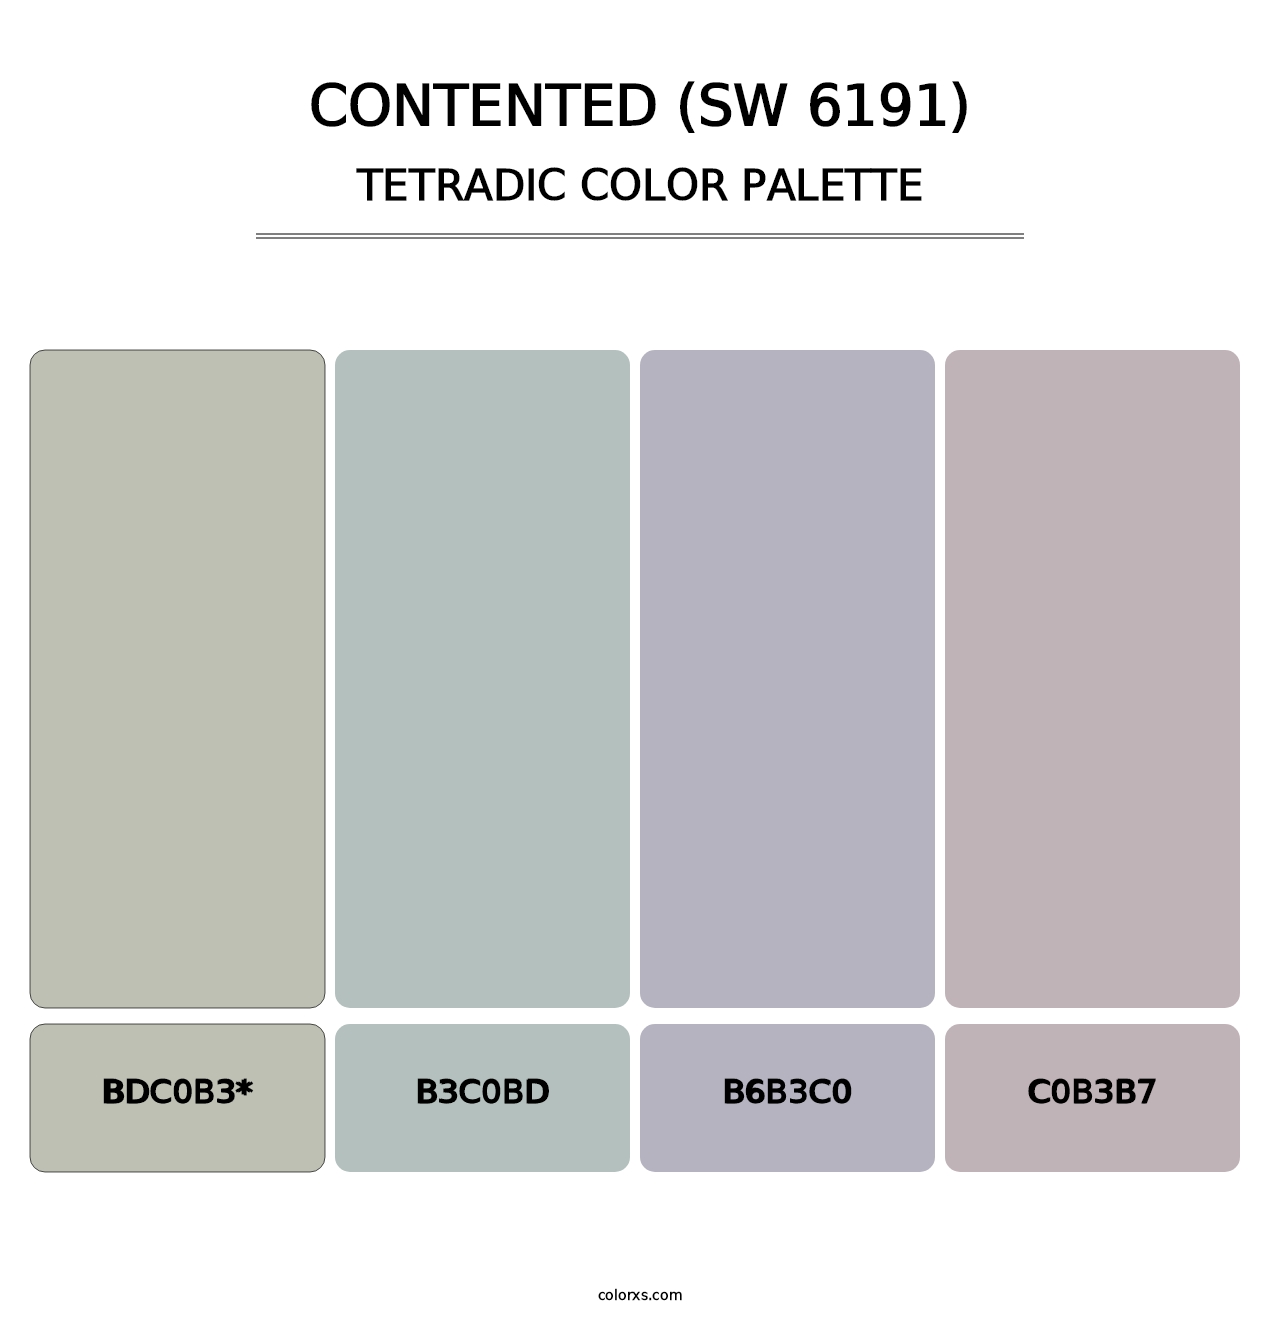 Contented (SW 6191) - Tetradic Color Palette